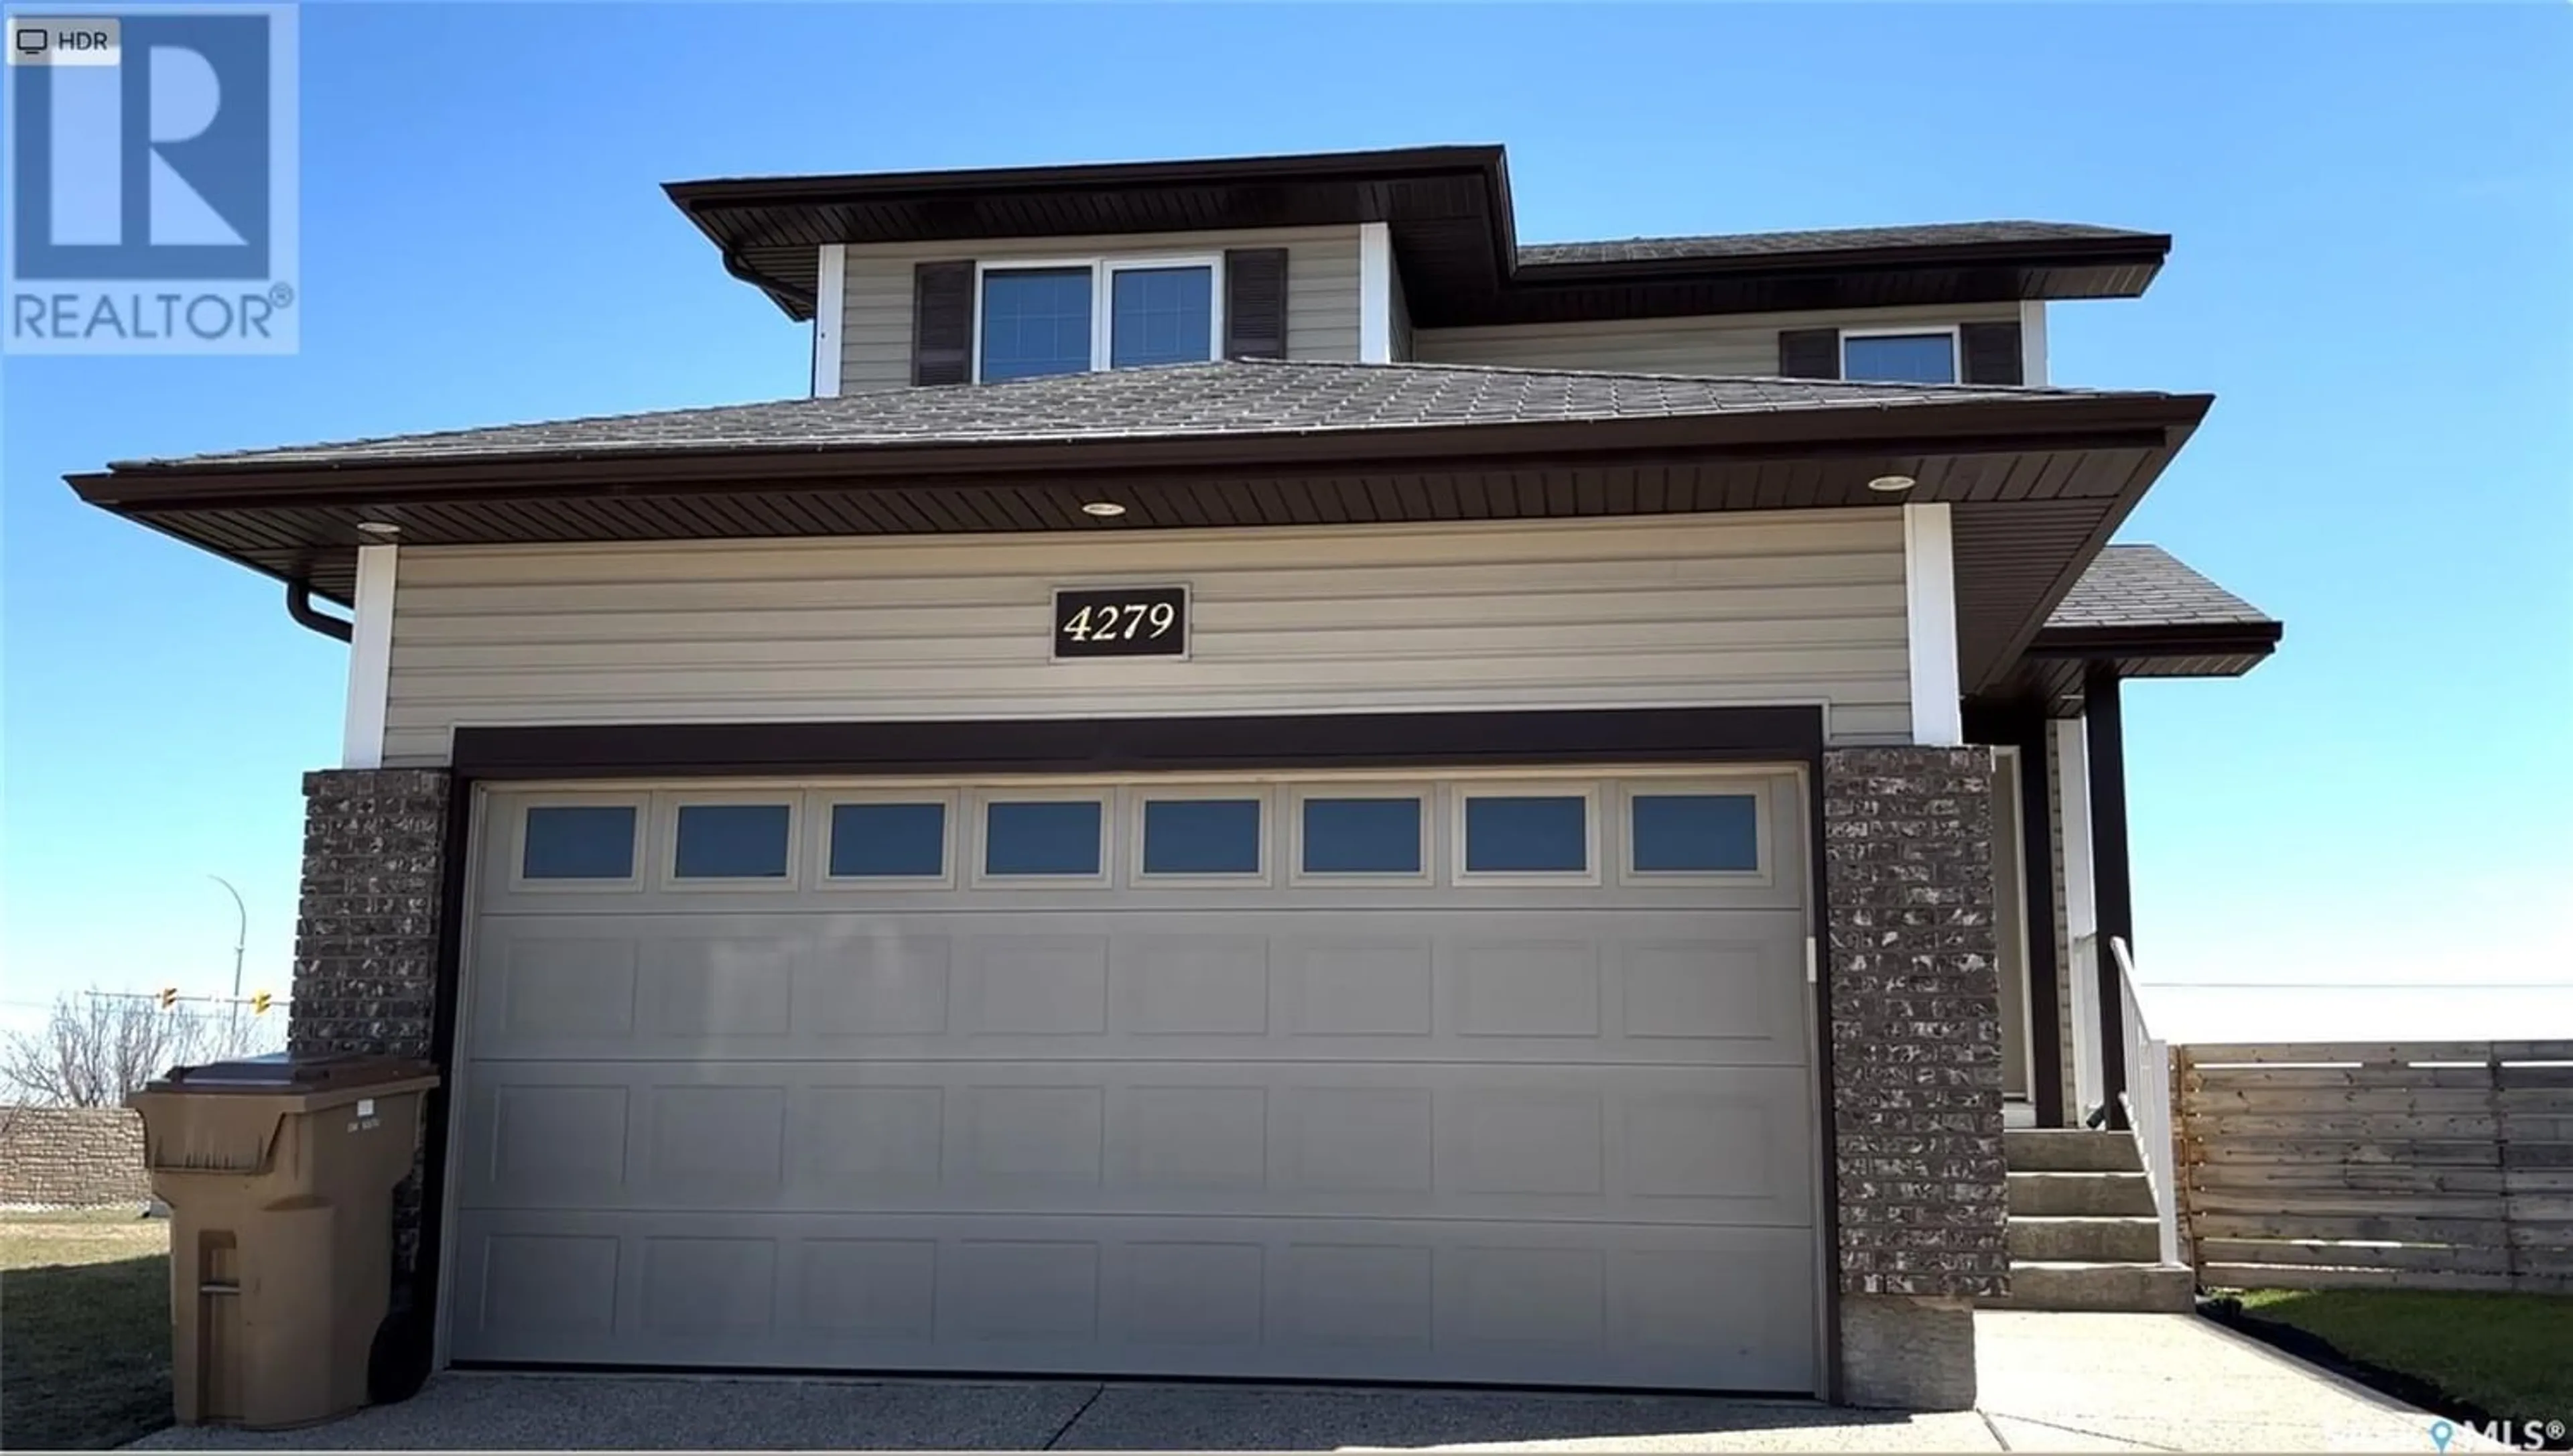 A pic from exterior of the house or condo for 4279 Nicurity DRIVE, Regina Saskatchewan S4X0C1